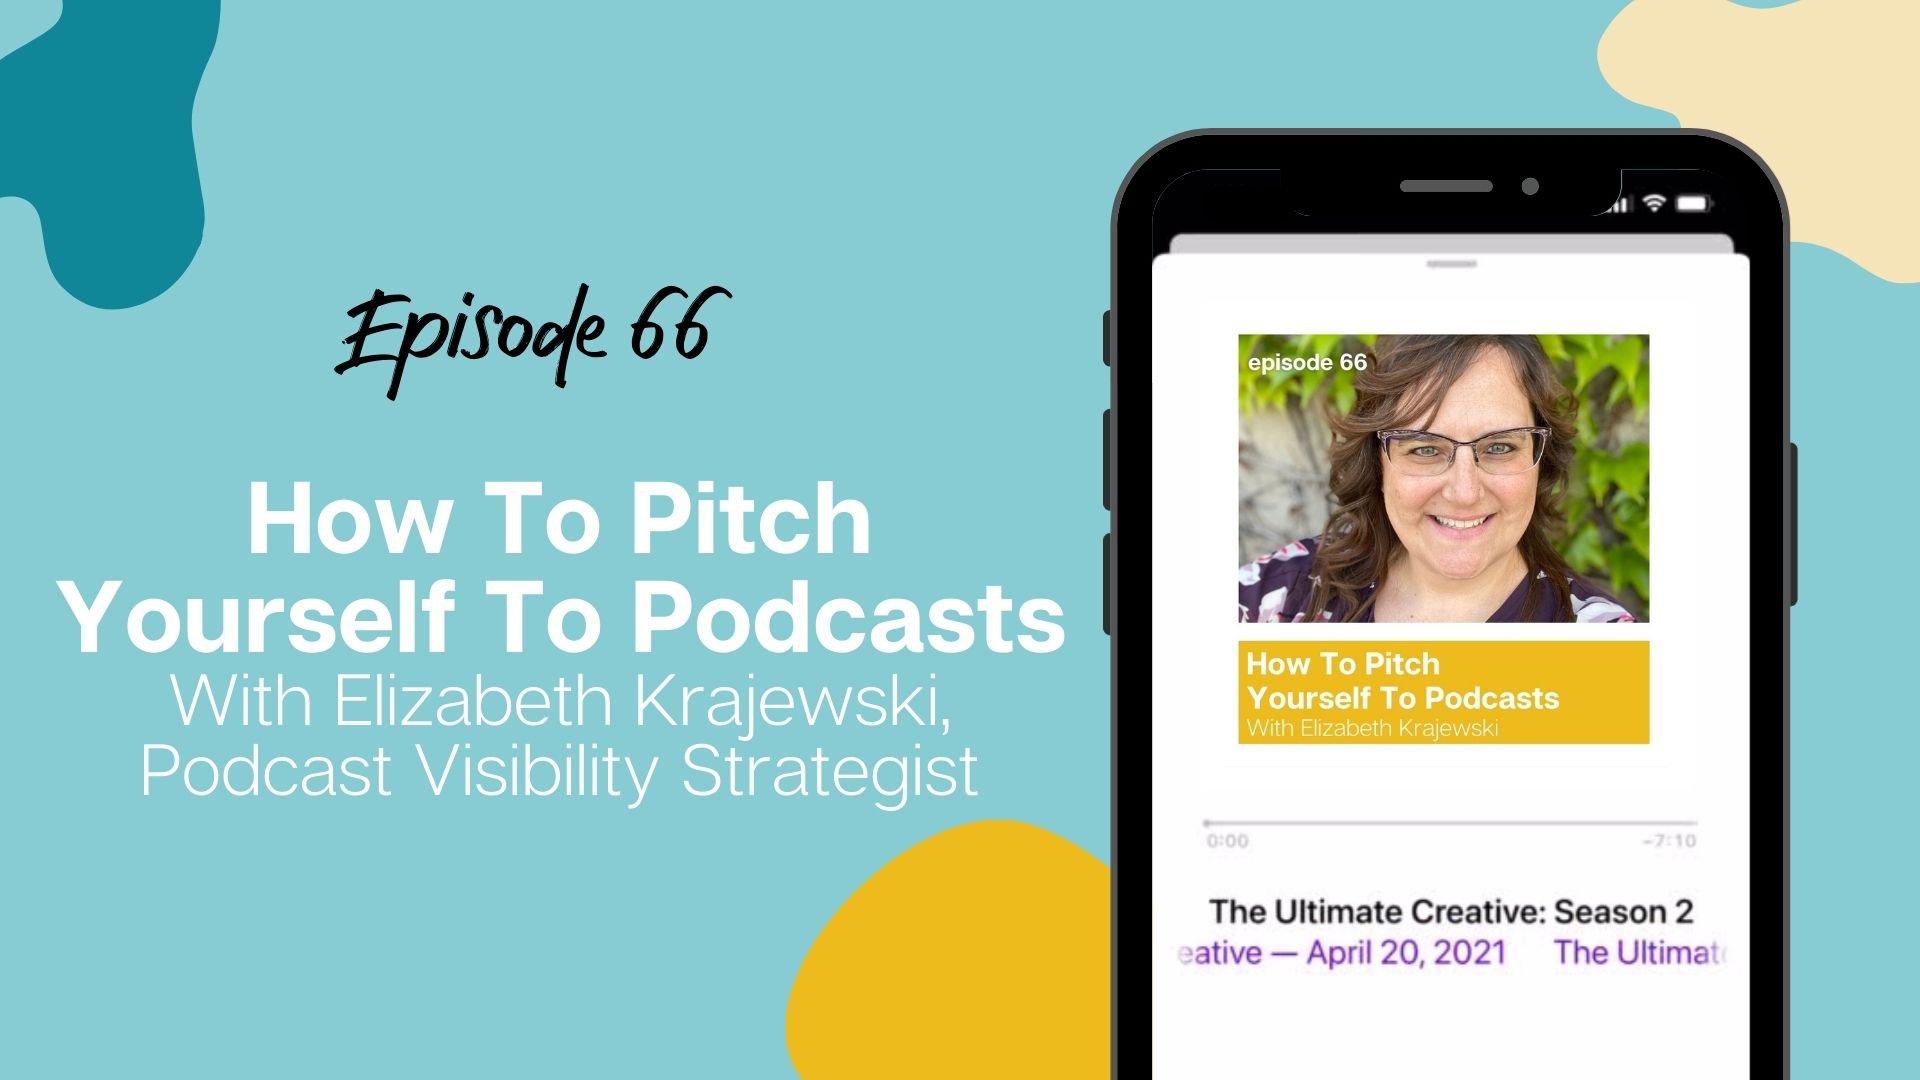 How To Pitch Yourself To Podcasts